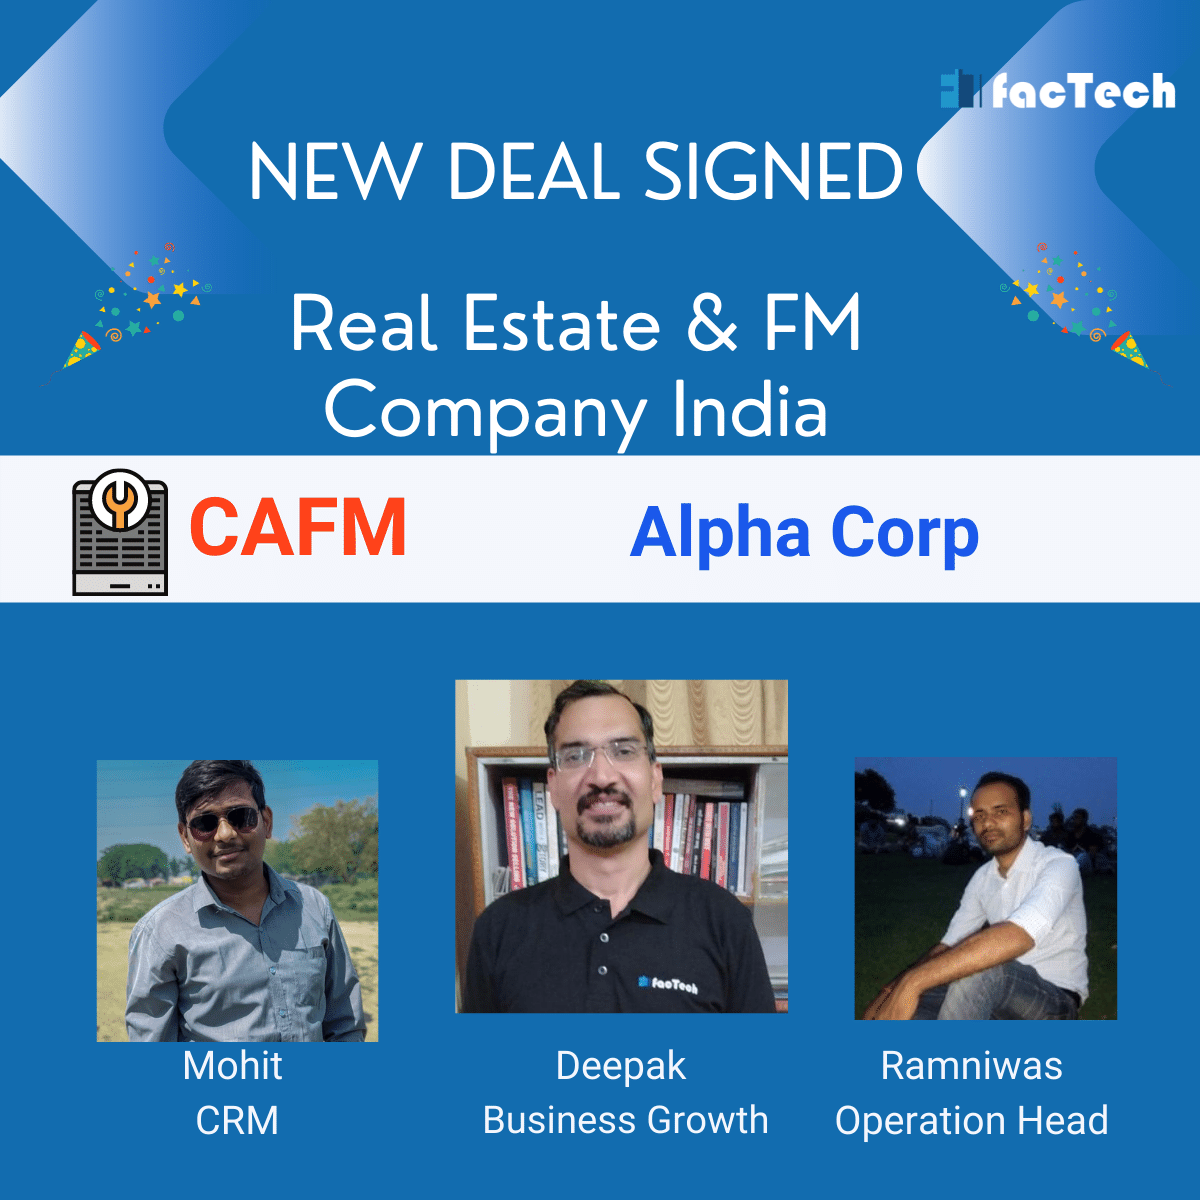 Alpha Corp Gurgaon select Factech digital partner. Kaizen CAFM to be used for digital facility operations